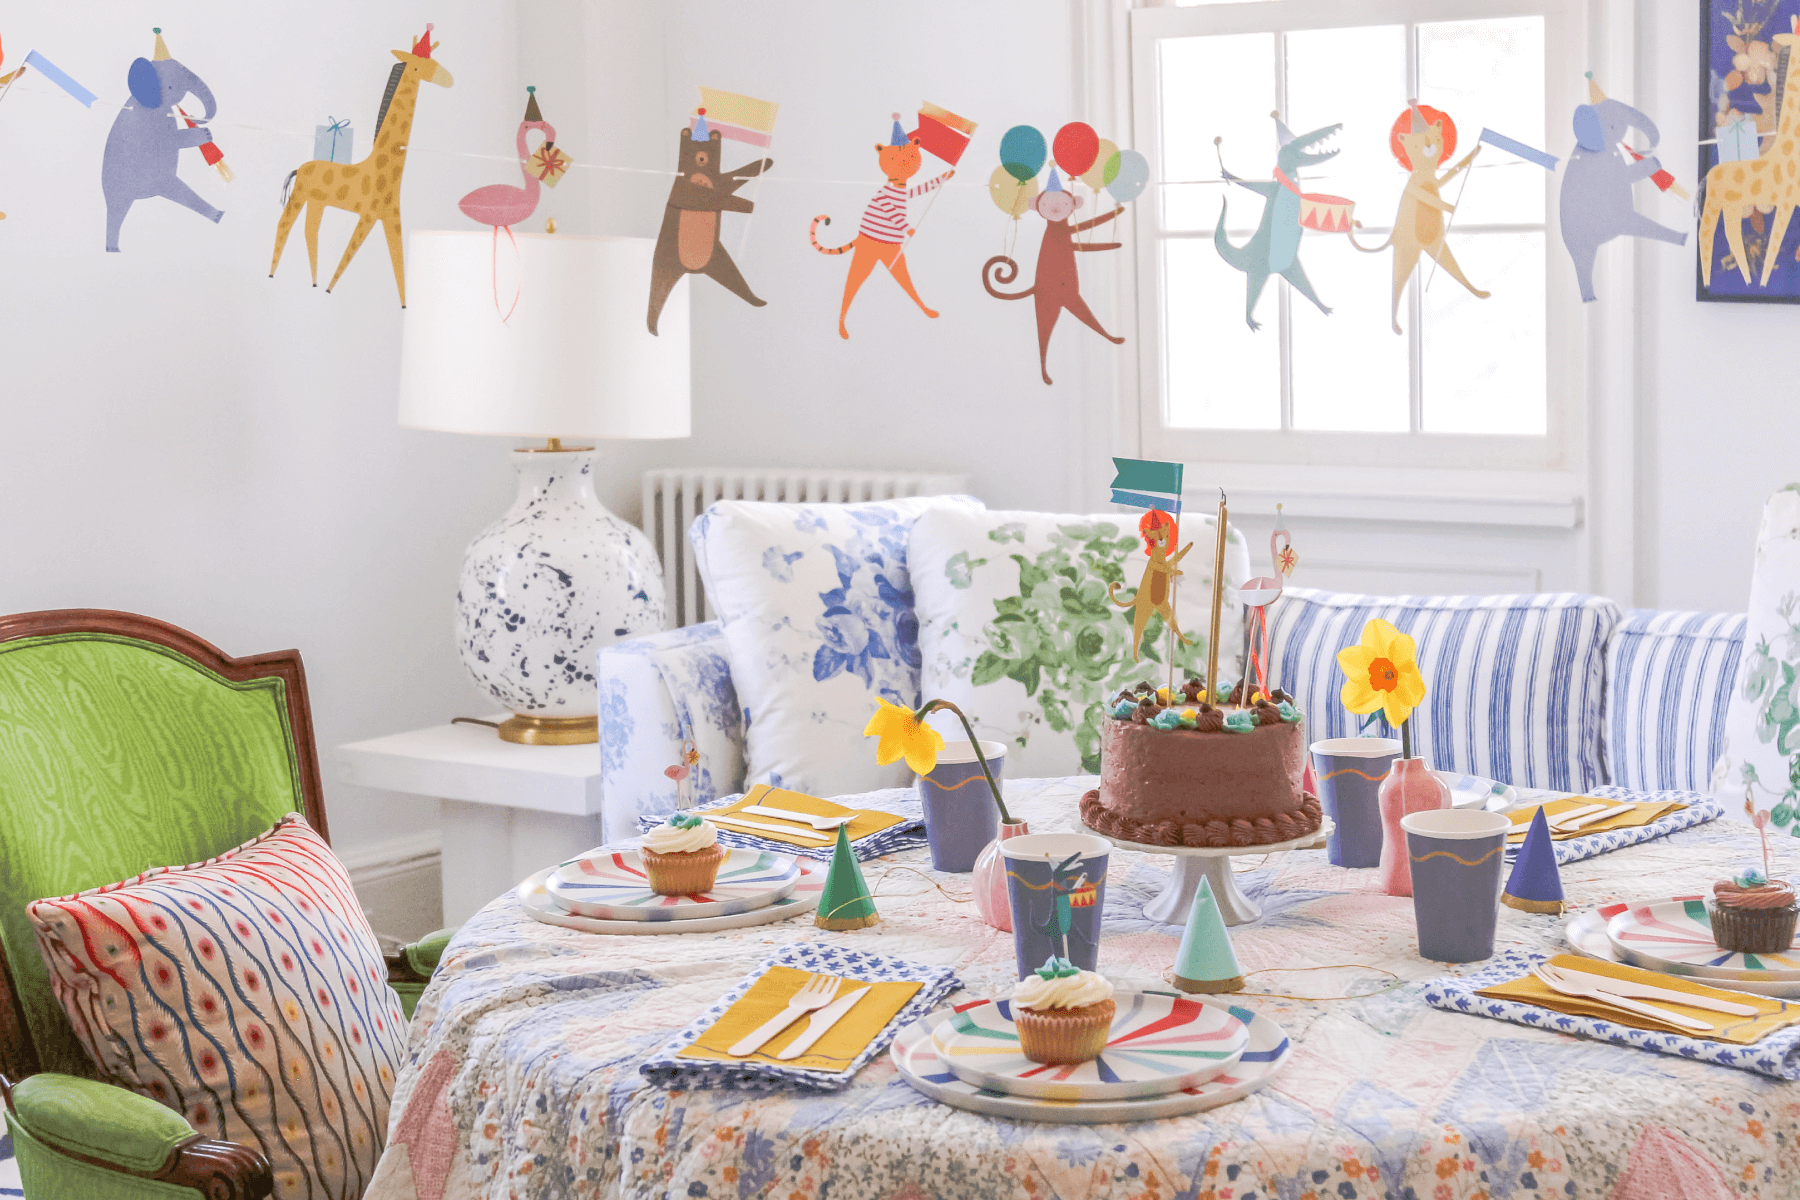 Party scene set with a quilted tablecloth, animal-themed kids' birthday decorations, and a chocolate cake.